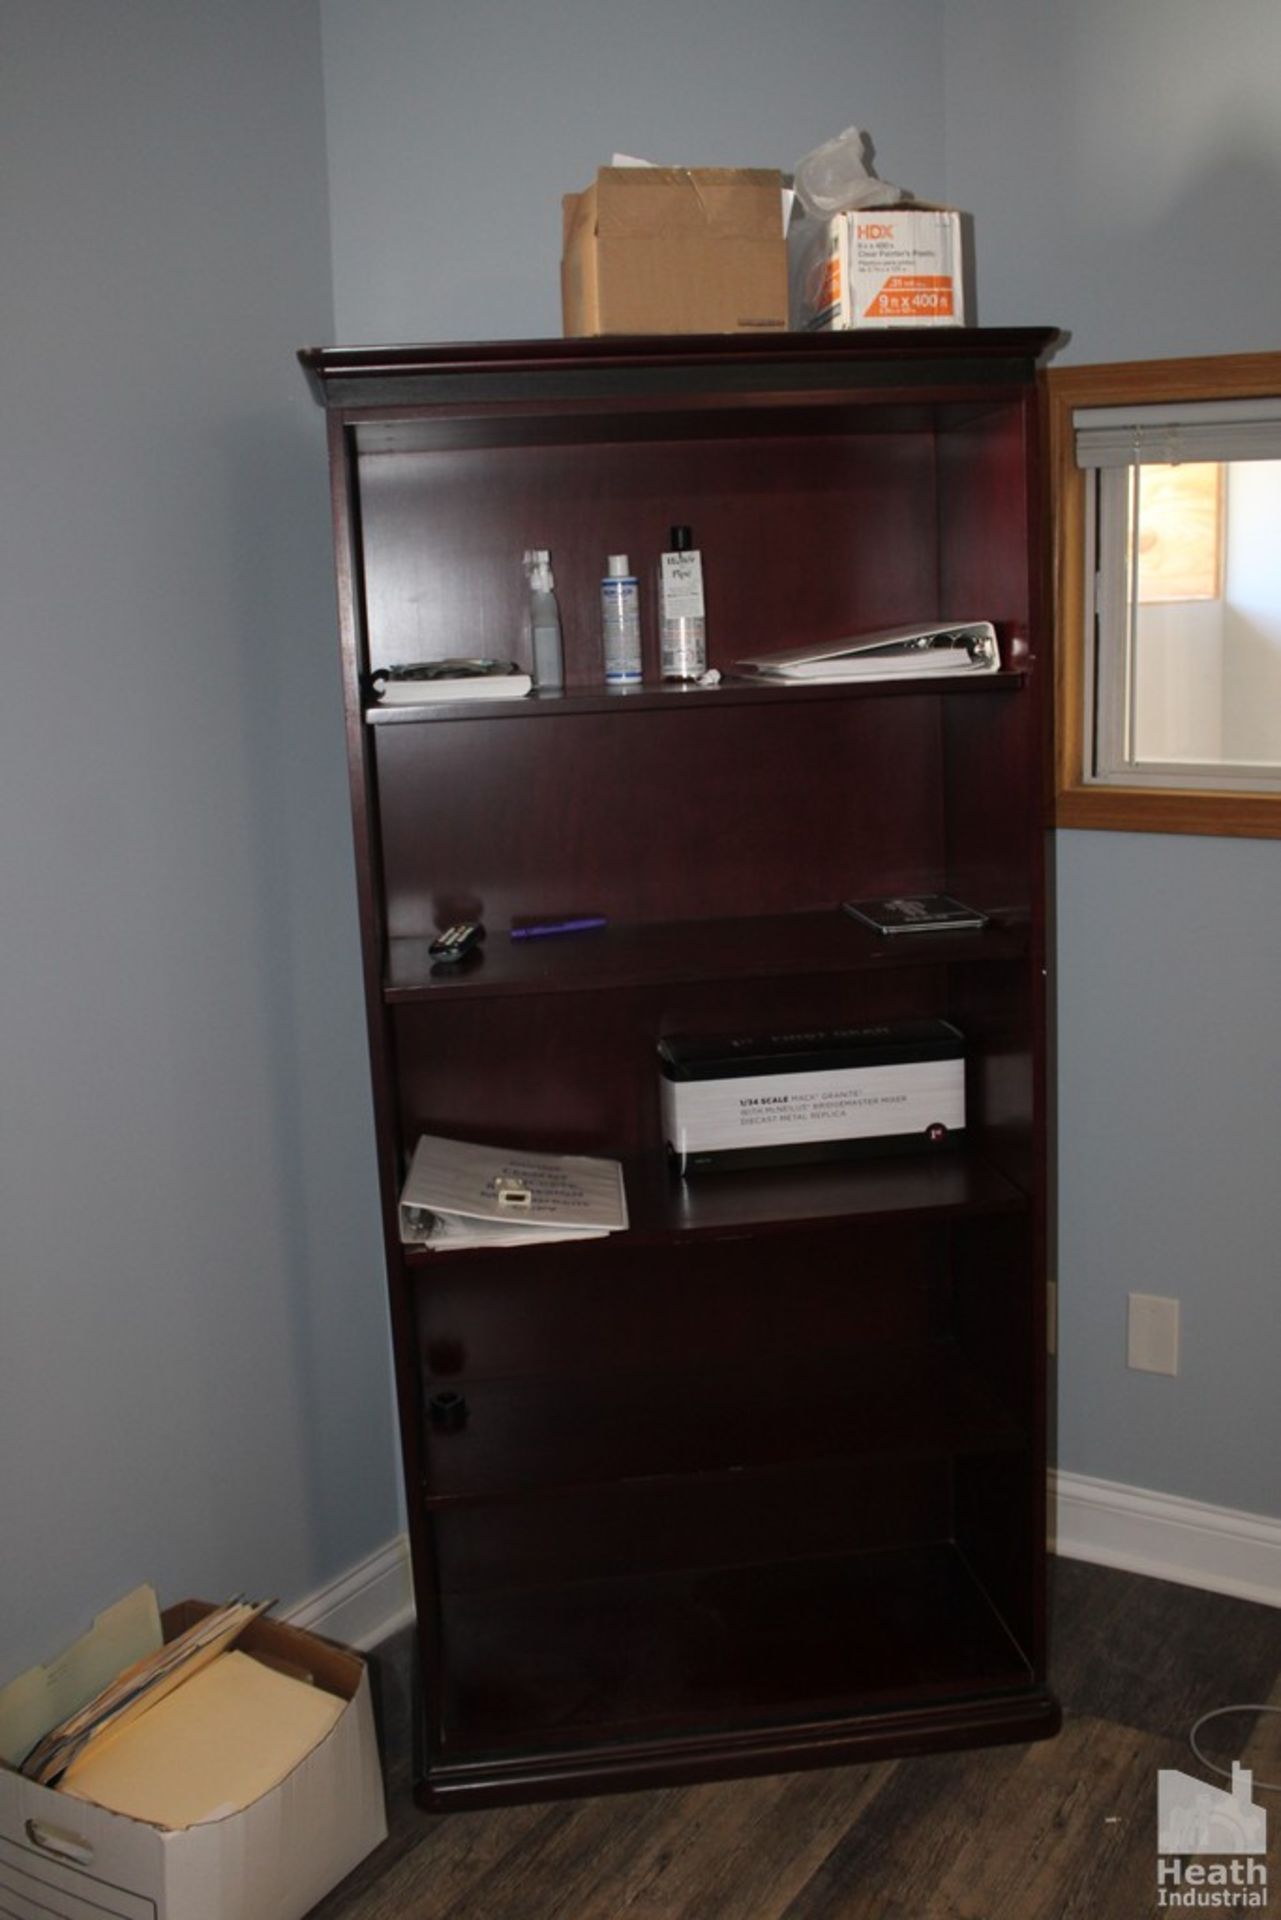 EXECUTIVE OFFICE WITH DESK, CREDENZA, CABINET, SHELF AND TWO CHAIRS - Image 2 of 4